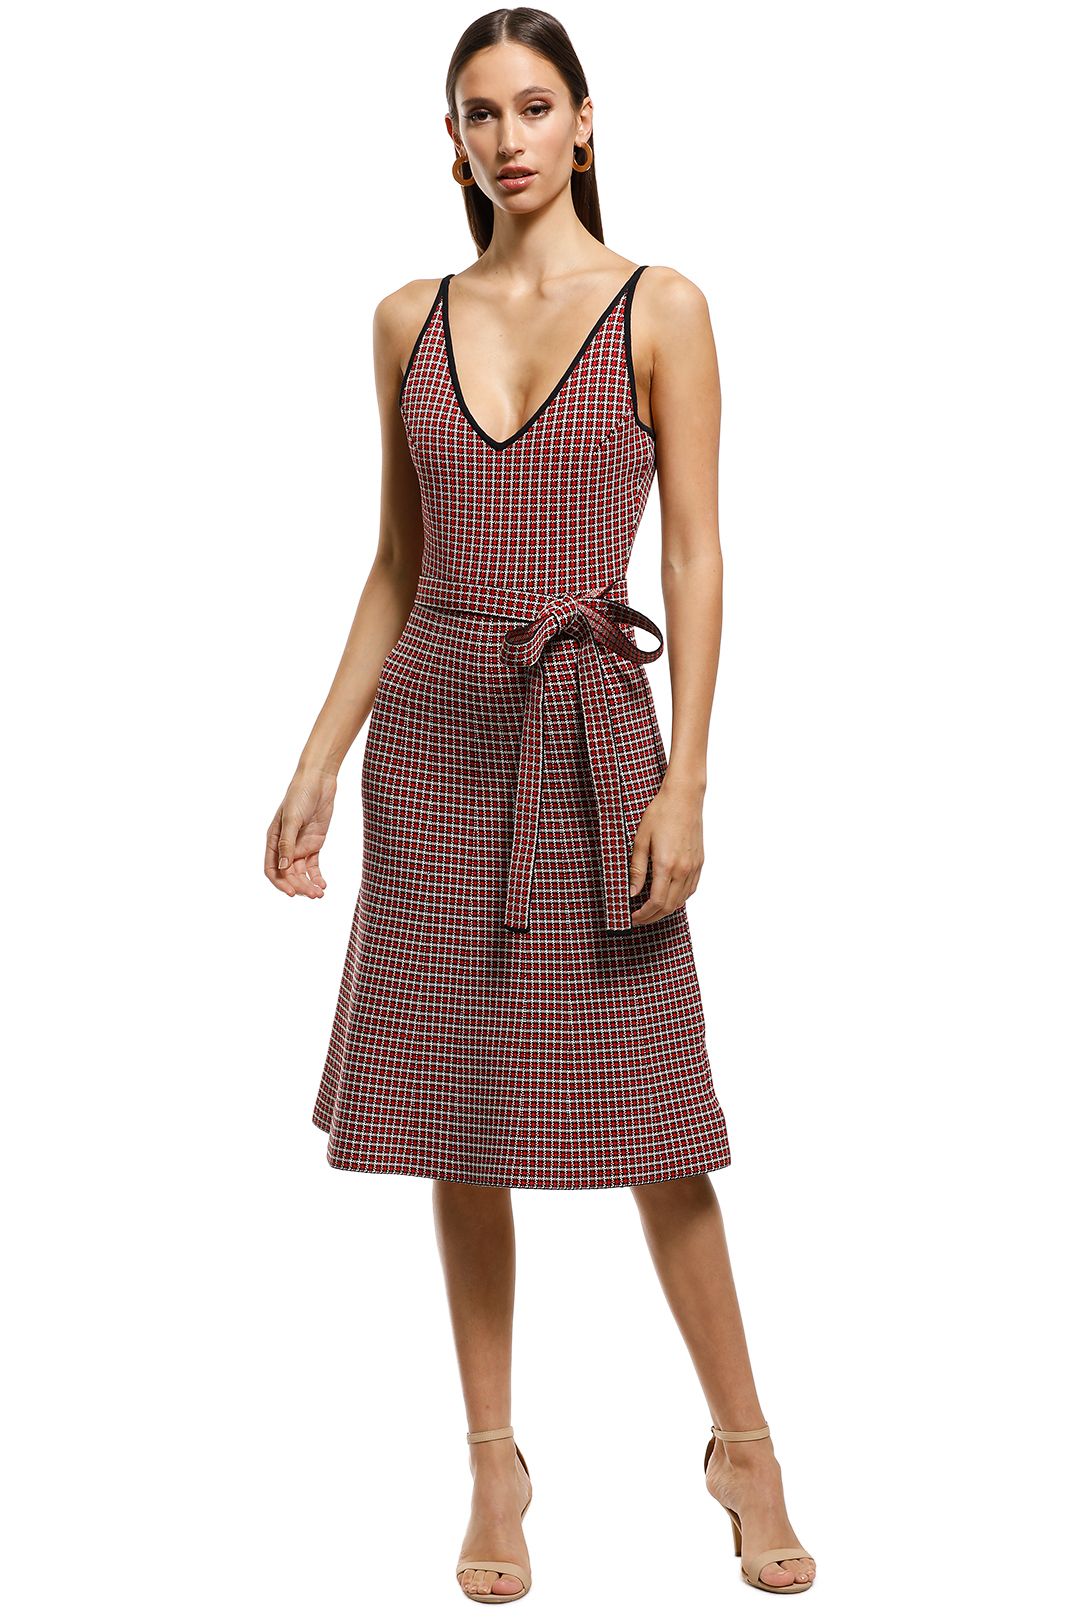 Scanlan Theodore - Crepe Knit Plaid Dress - Red - Front